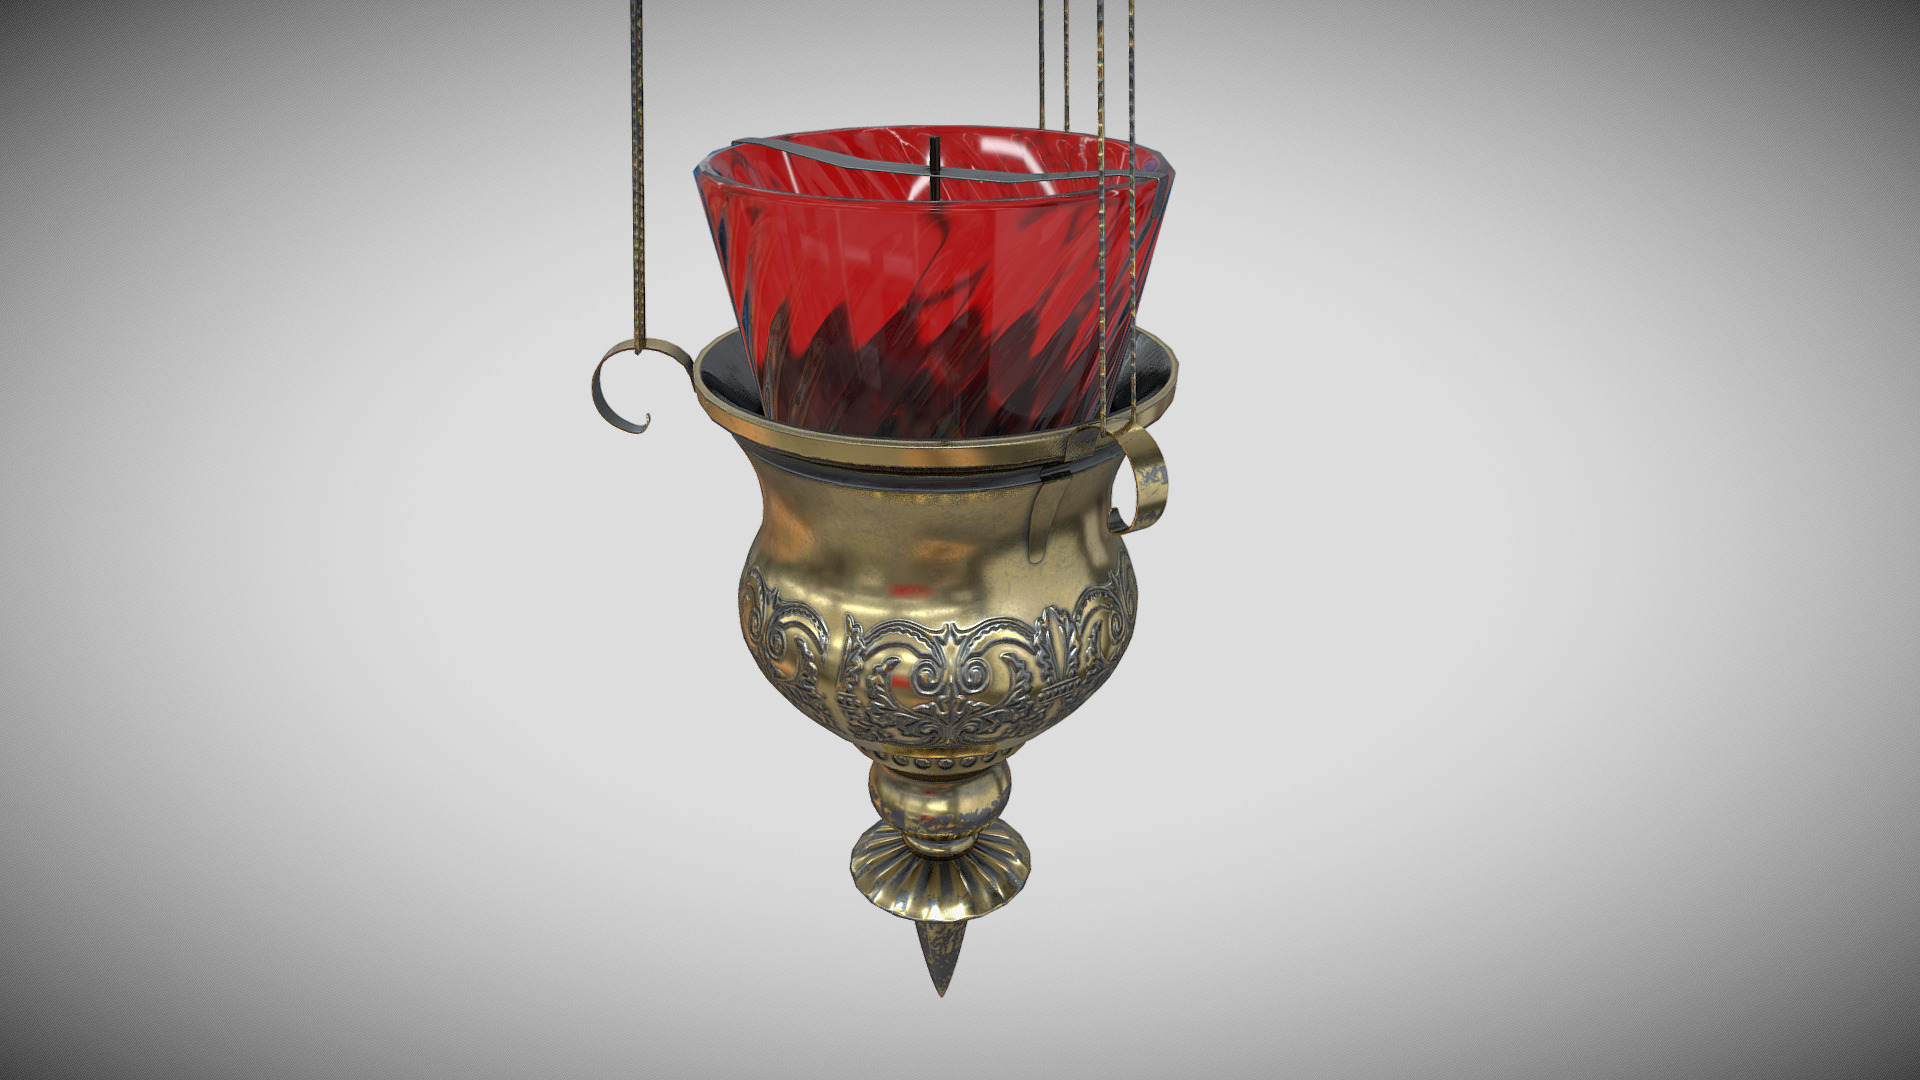 3D model Icon Lamp (навесная лампада) - This is a 3D model of the Icon Lamp (навесная лампада). The 3D model is about a glass jar with a red lid.